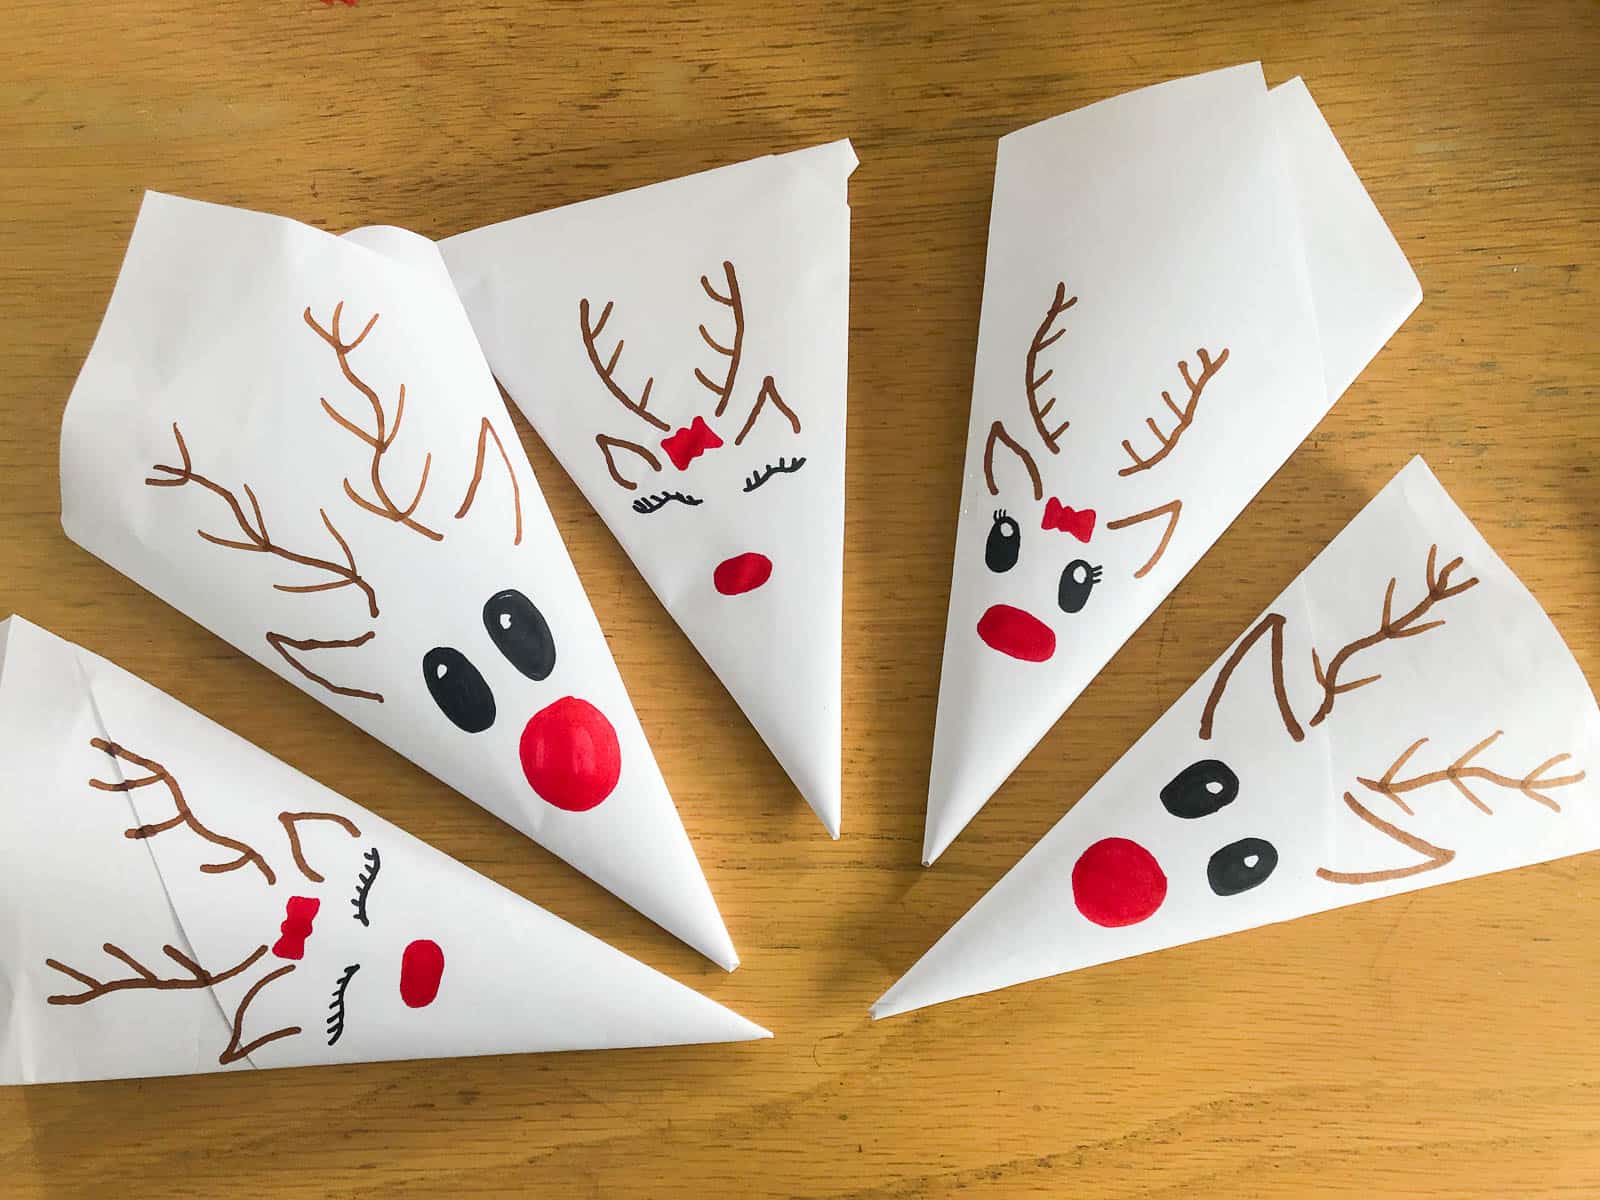 5 homemade pouches filled with reindeer food with hand drawn faces of reindeer ready for Christmas eve.